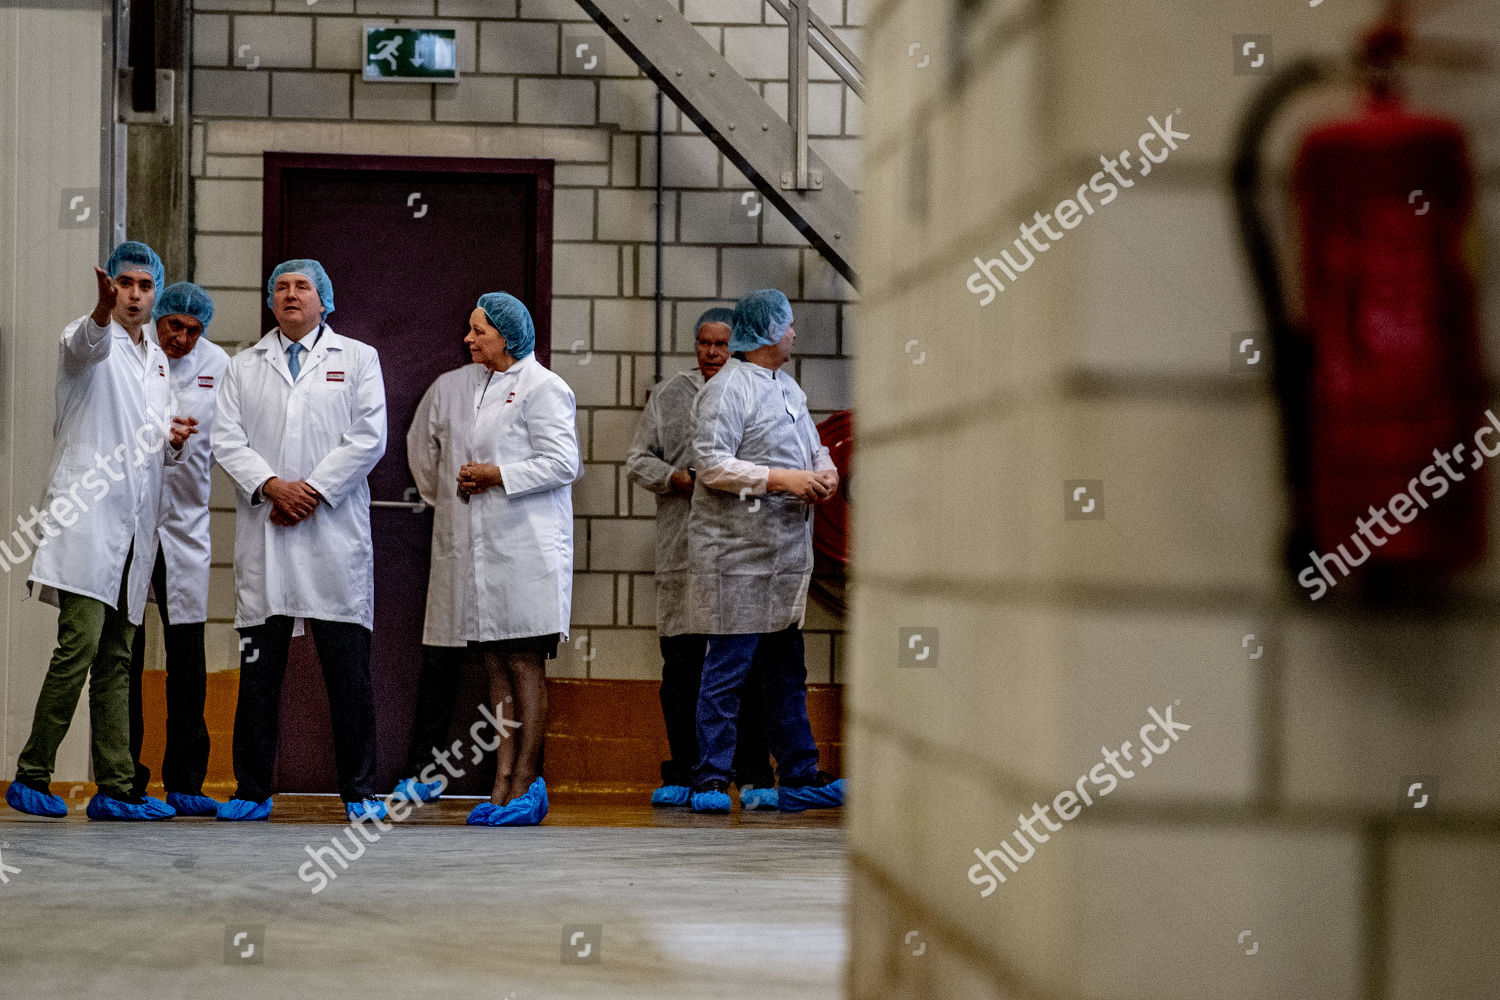 king-willem-alexander-is-making-a-working-visit-to-two-companies-in-brainport-eindhoven-helmond-the-netherlands-shutterstock-editorial-10031459g.jpg